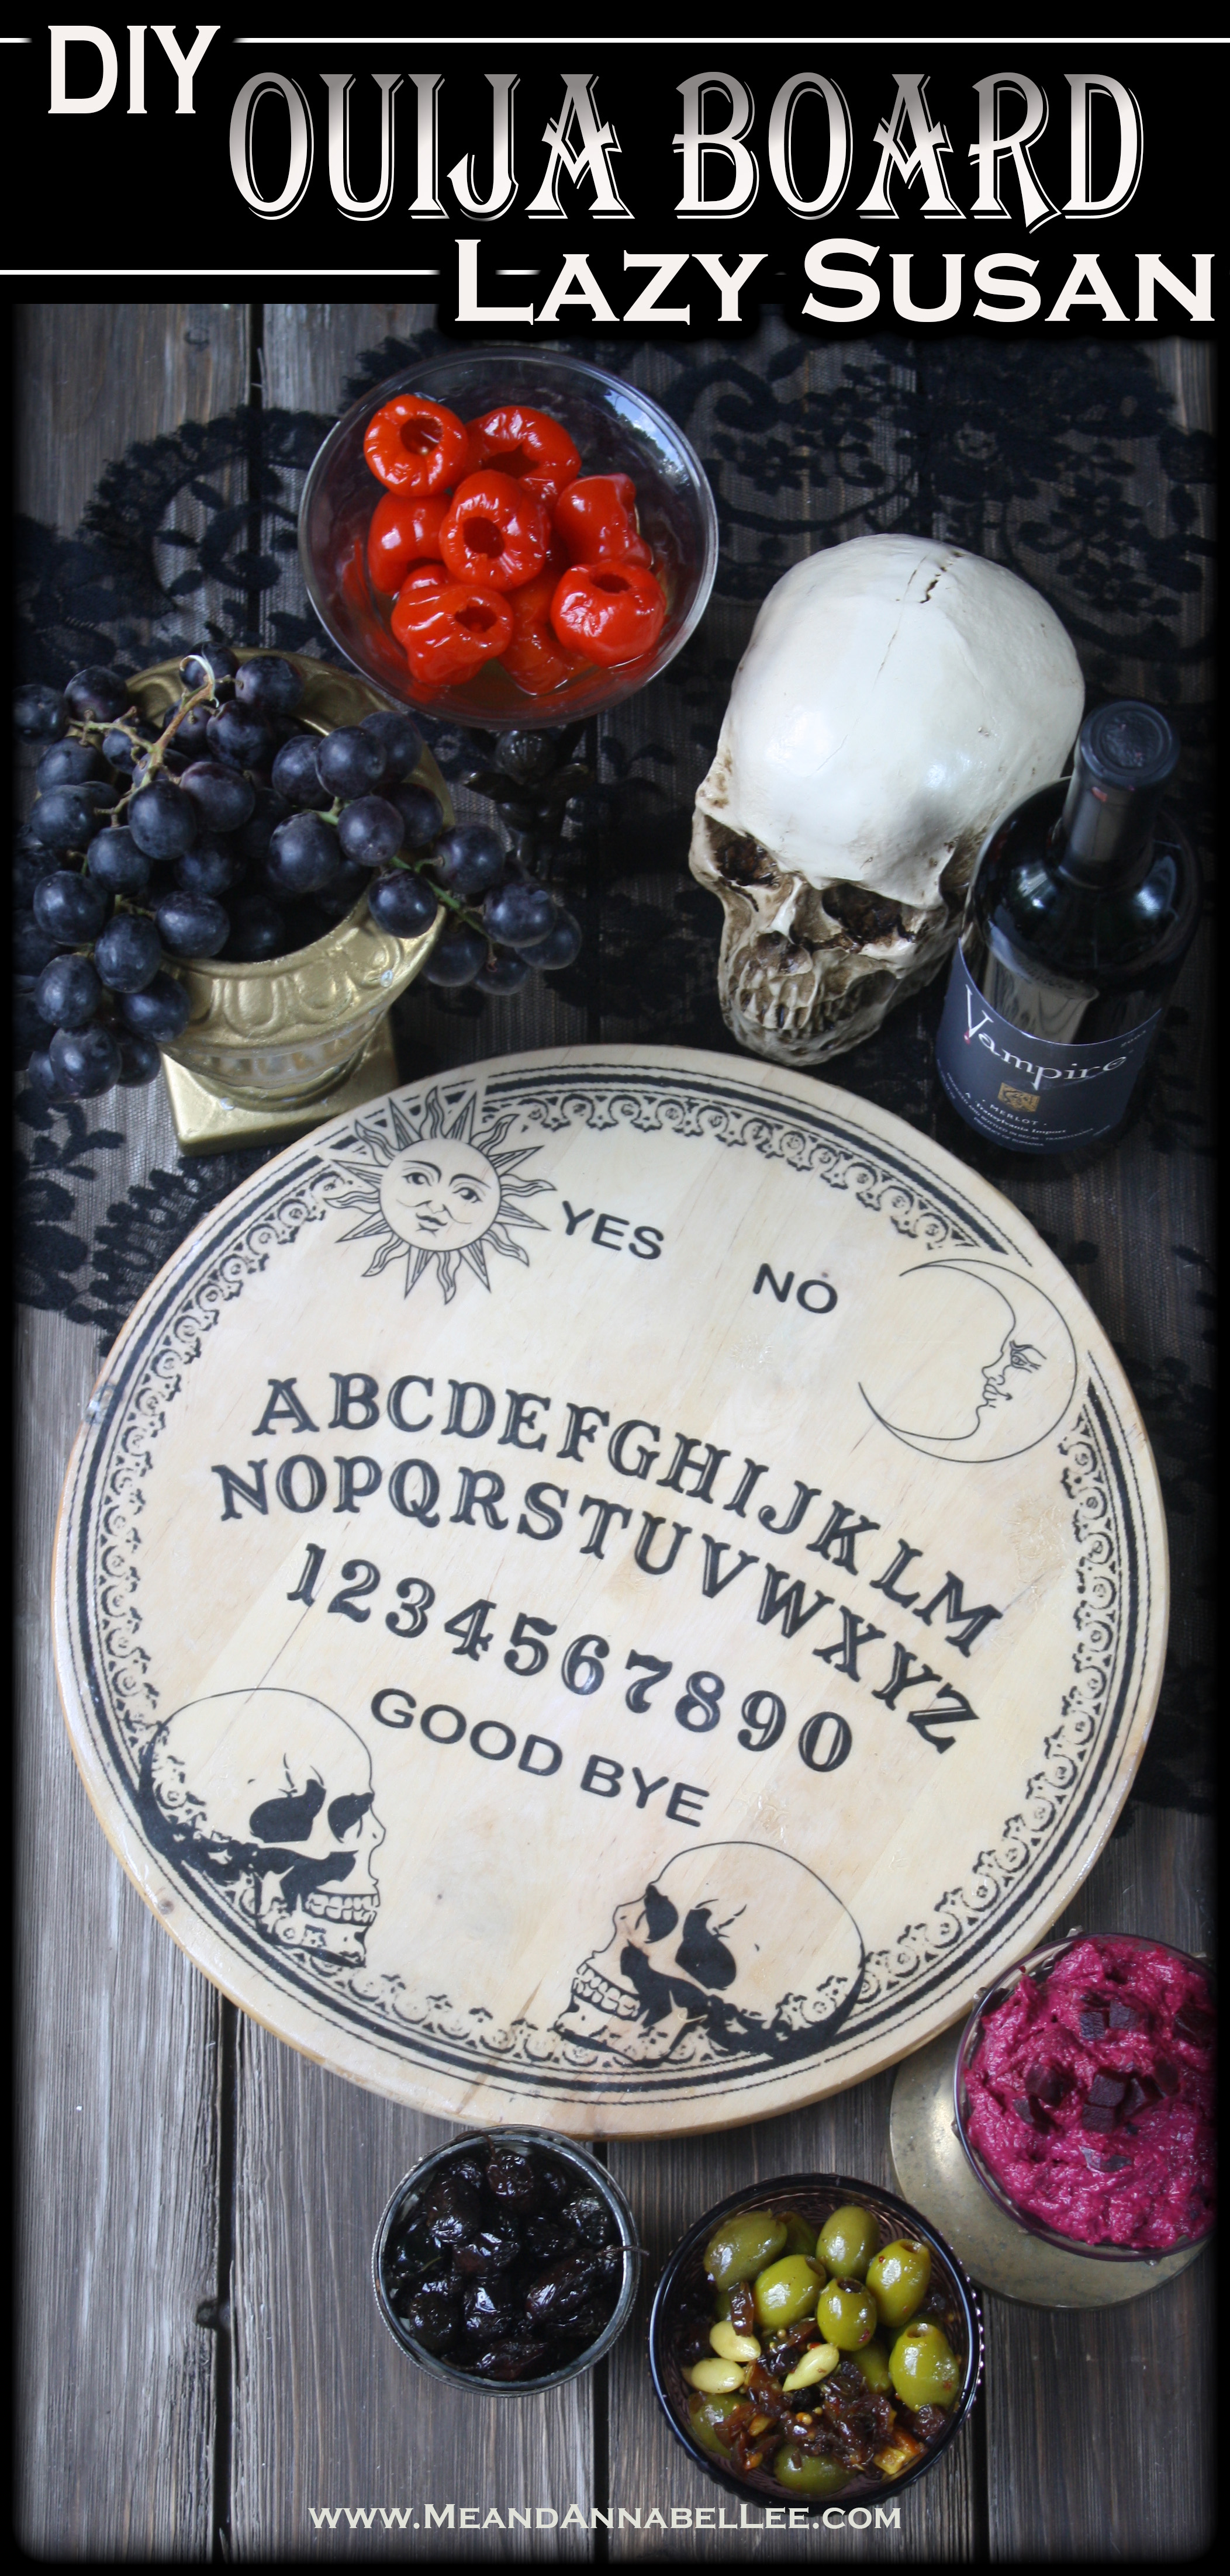 DIY Ouija Board Lazy Susan | Transfer an Image to Wood with Liquitex |Halloween Crafts | Gothic Entertaining |Skulls, Sun & Moon | Goth Home Décor | www.MeandAnnabelLee.com